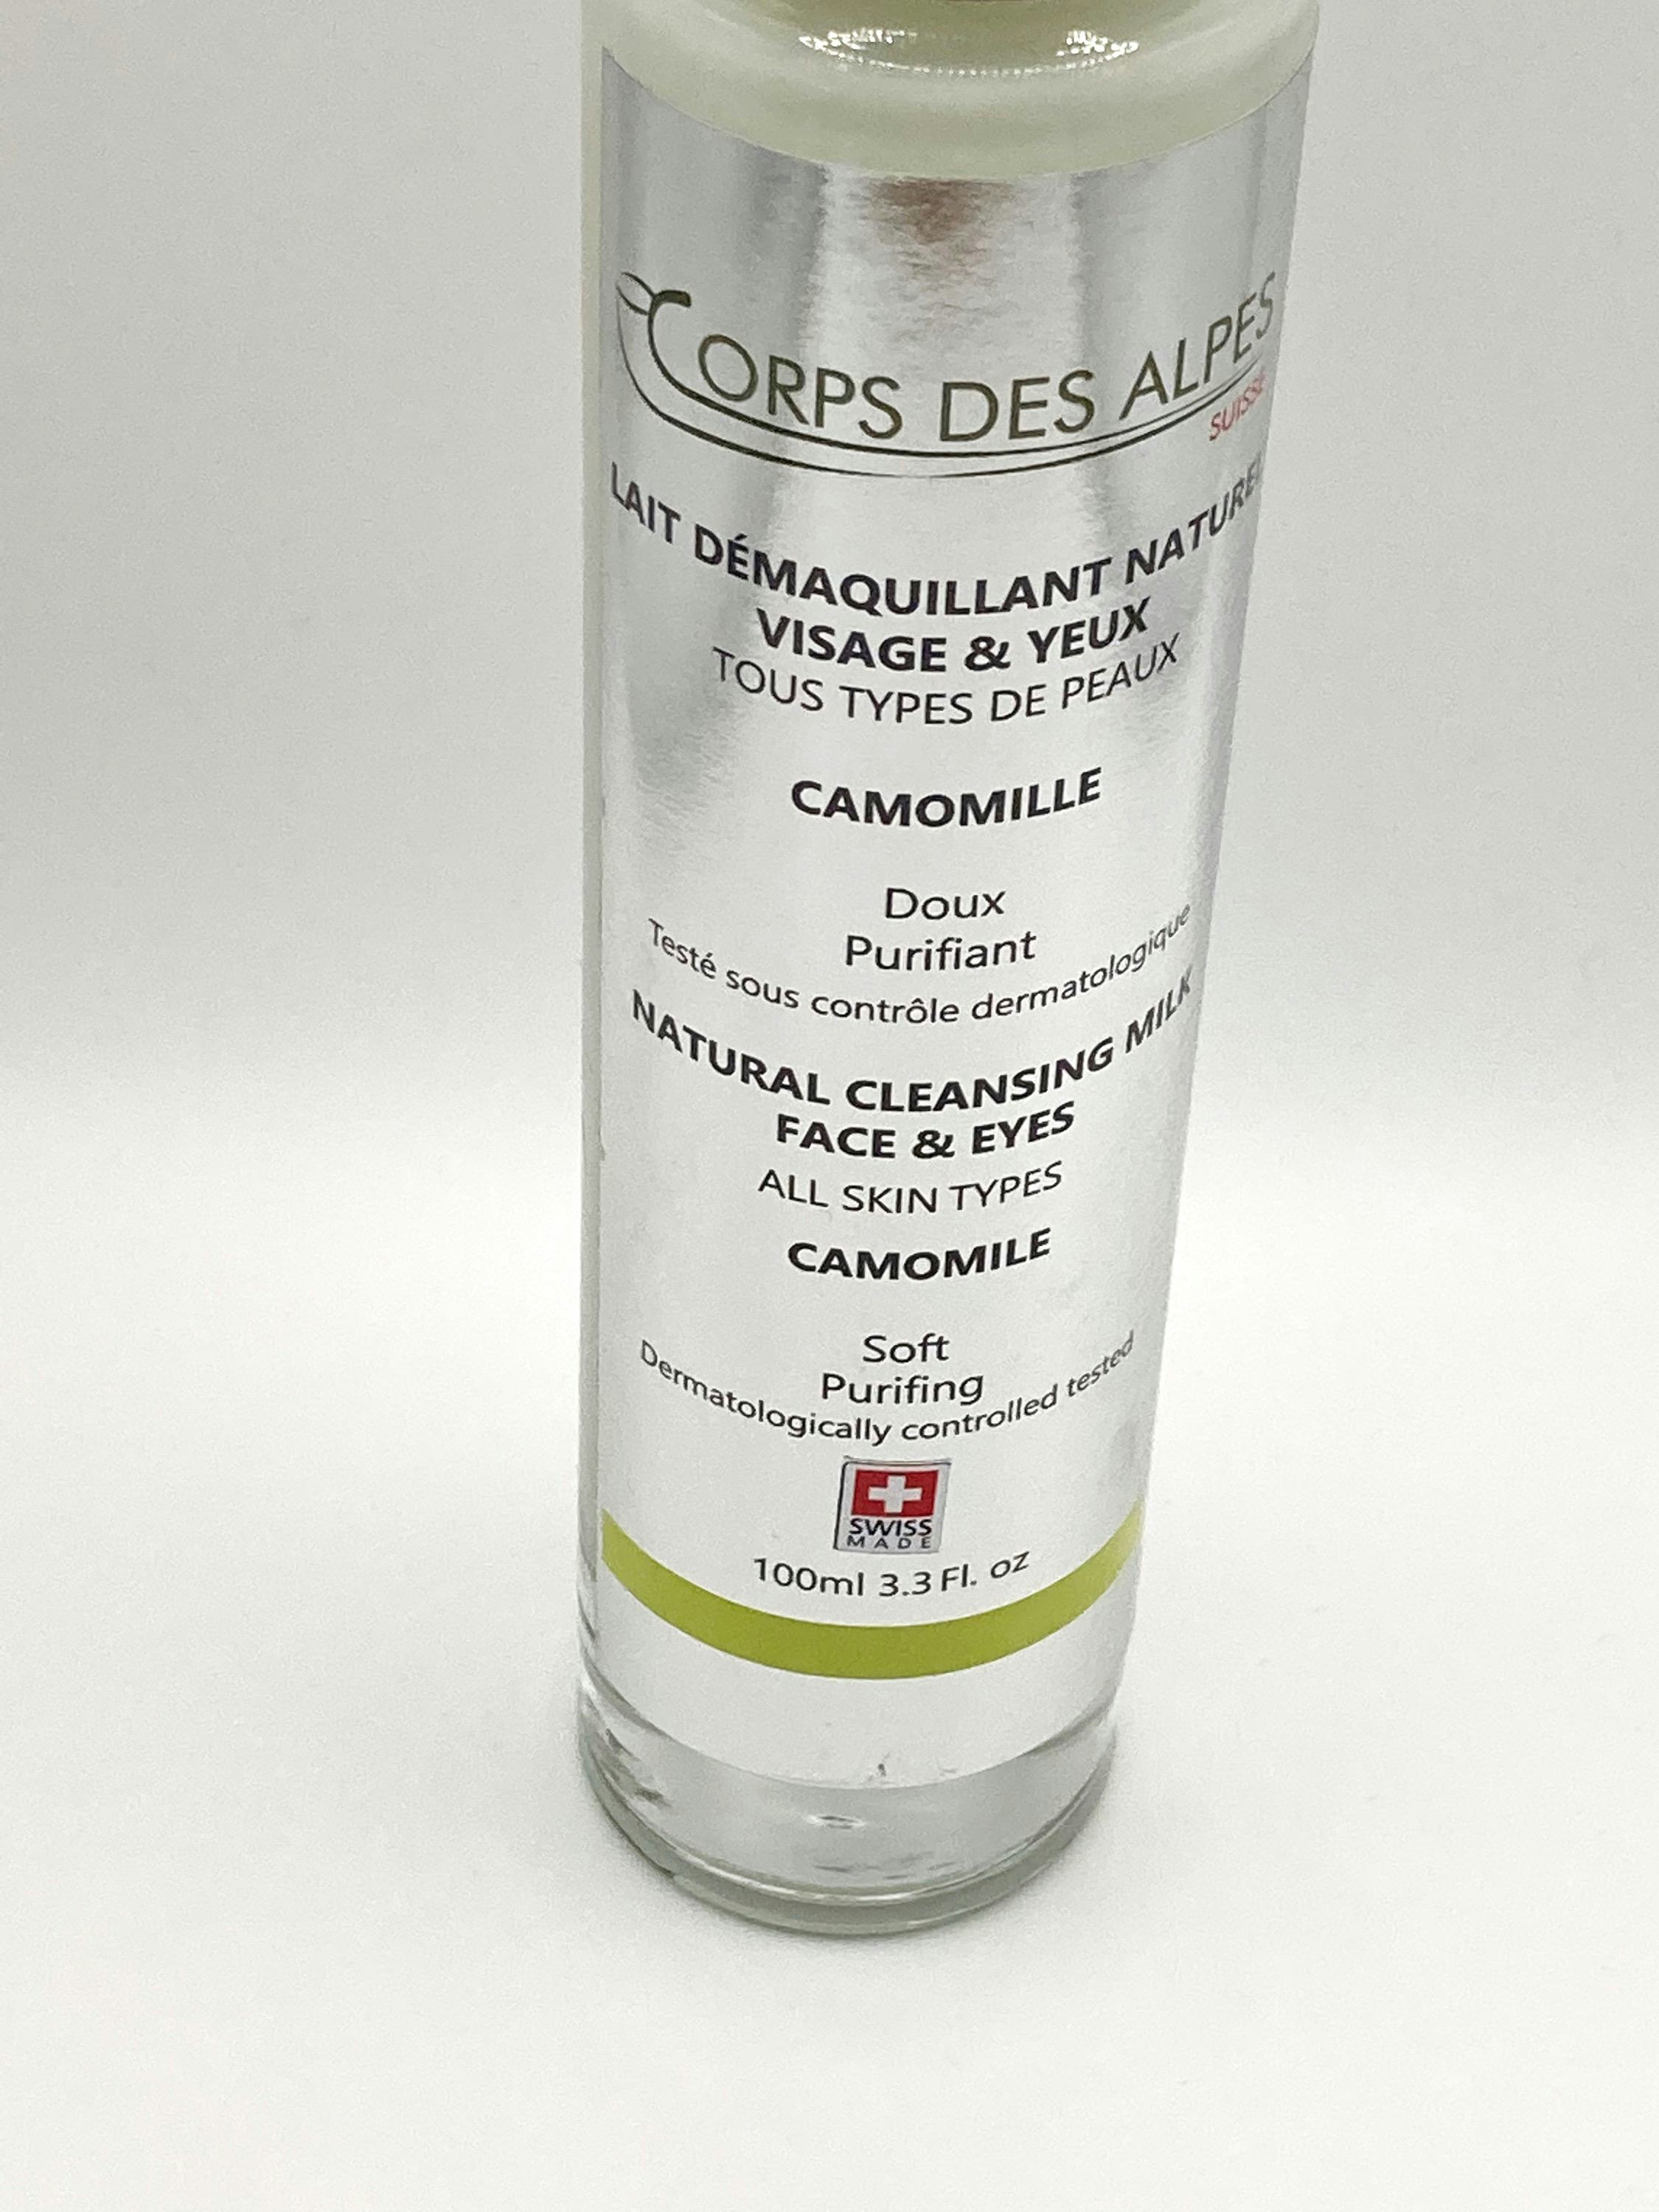 Chamomile Natural Cleansing Milk, artisanal product for direct sale in Switzerland